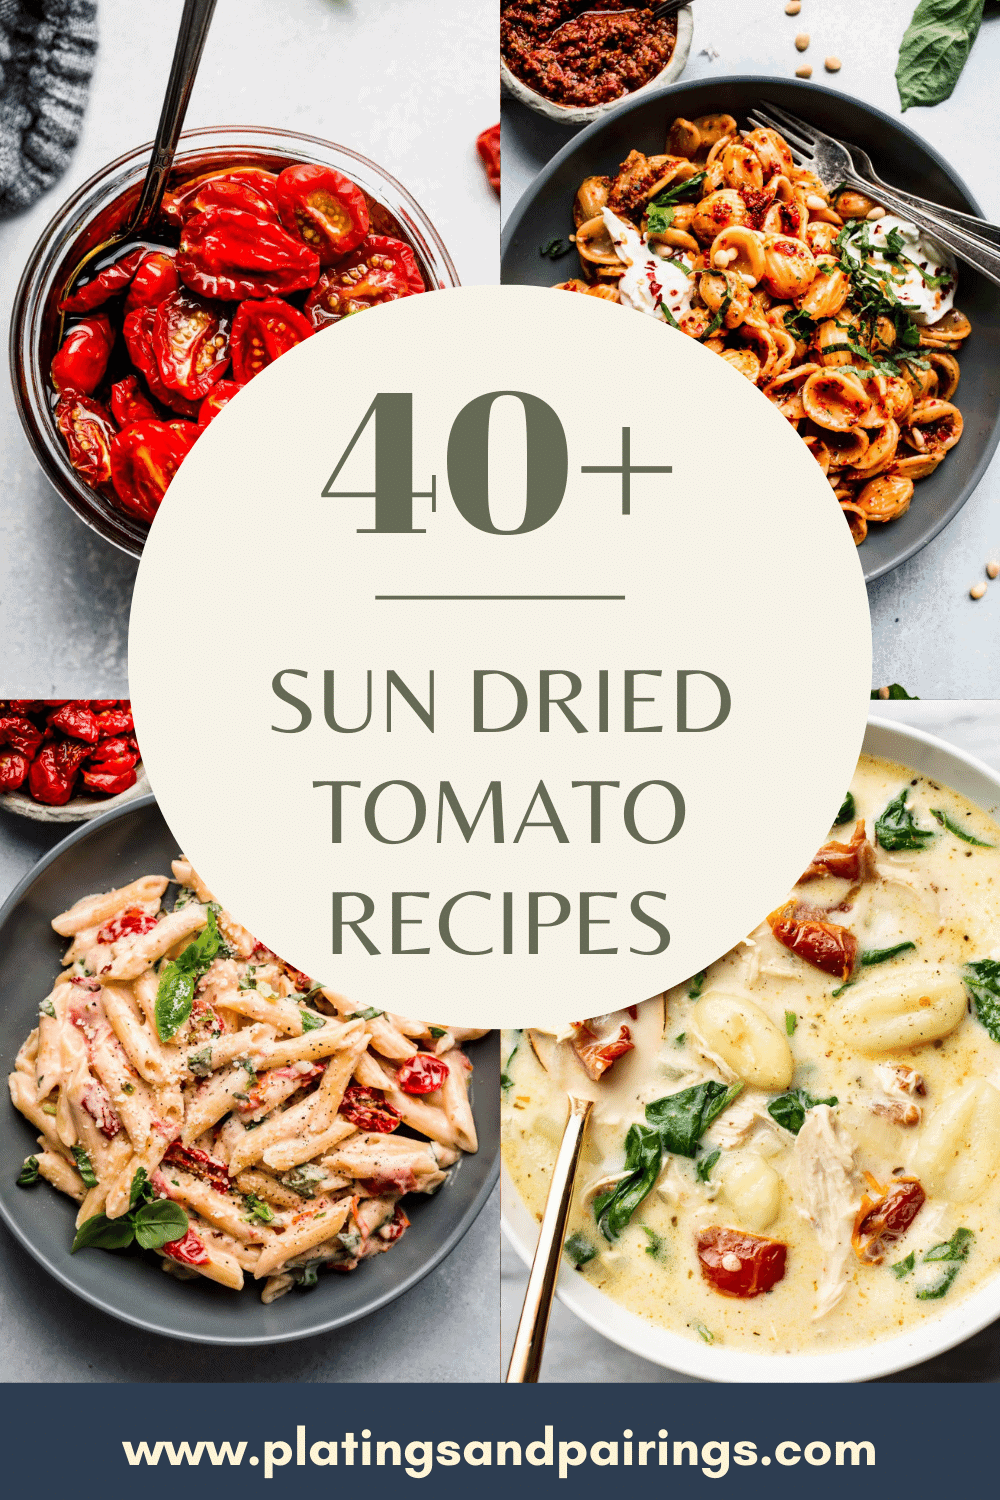 40+ Sun Dried Tomato Recipes (How to Use Them)